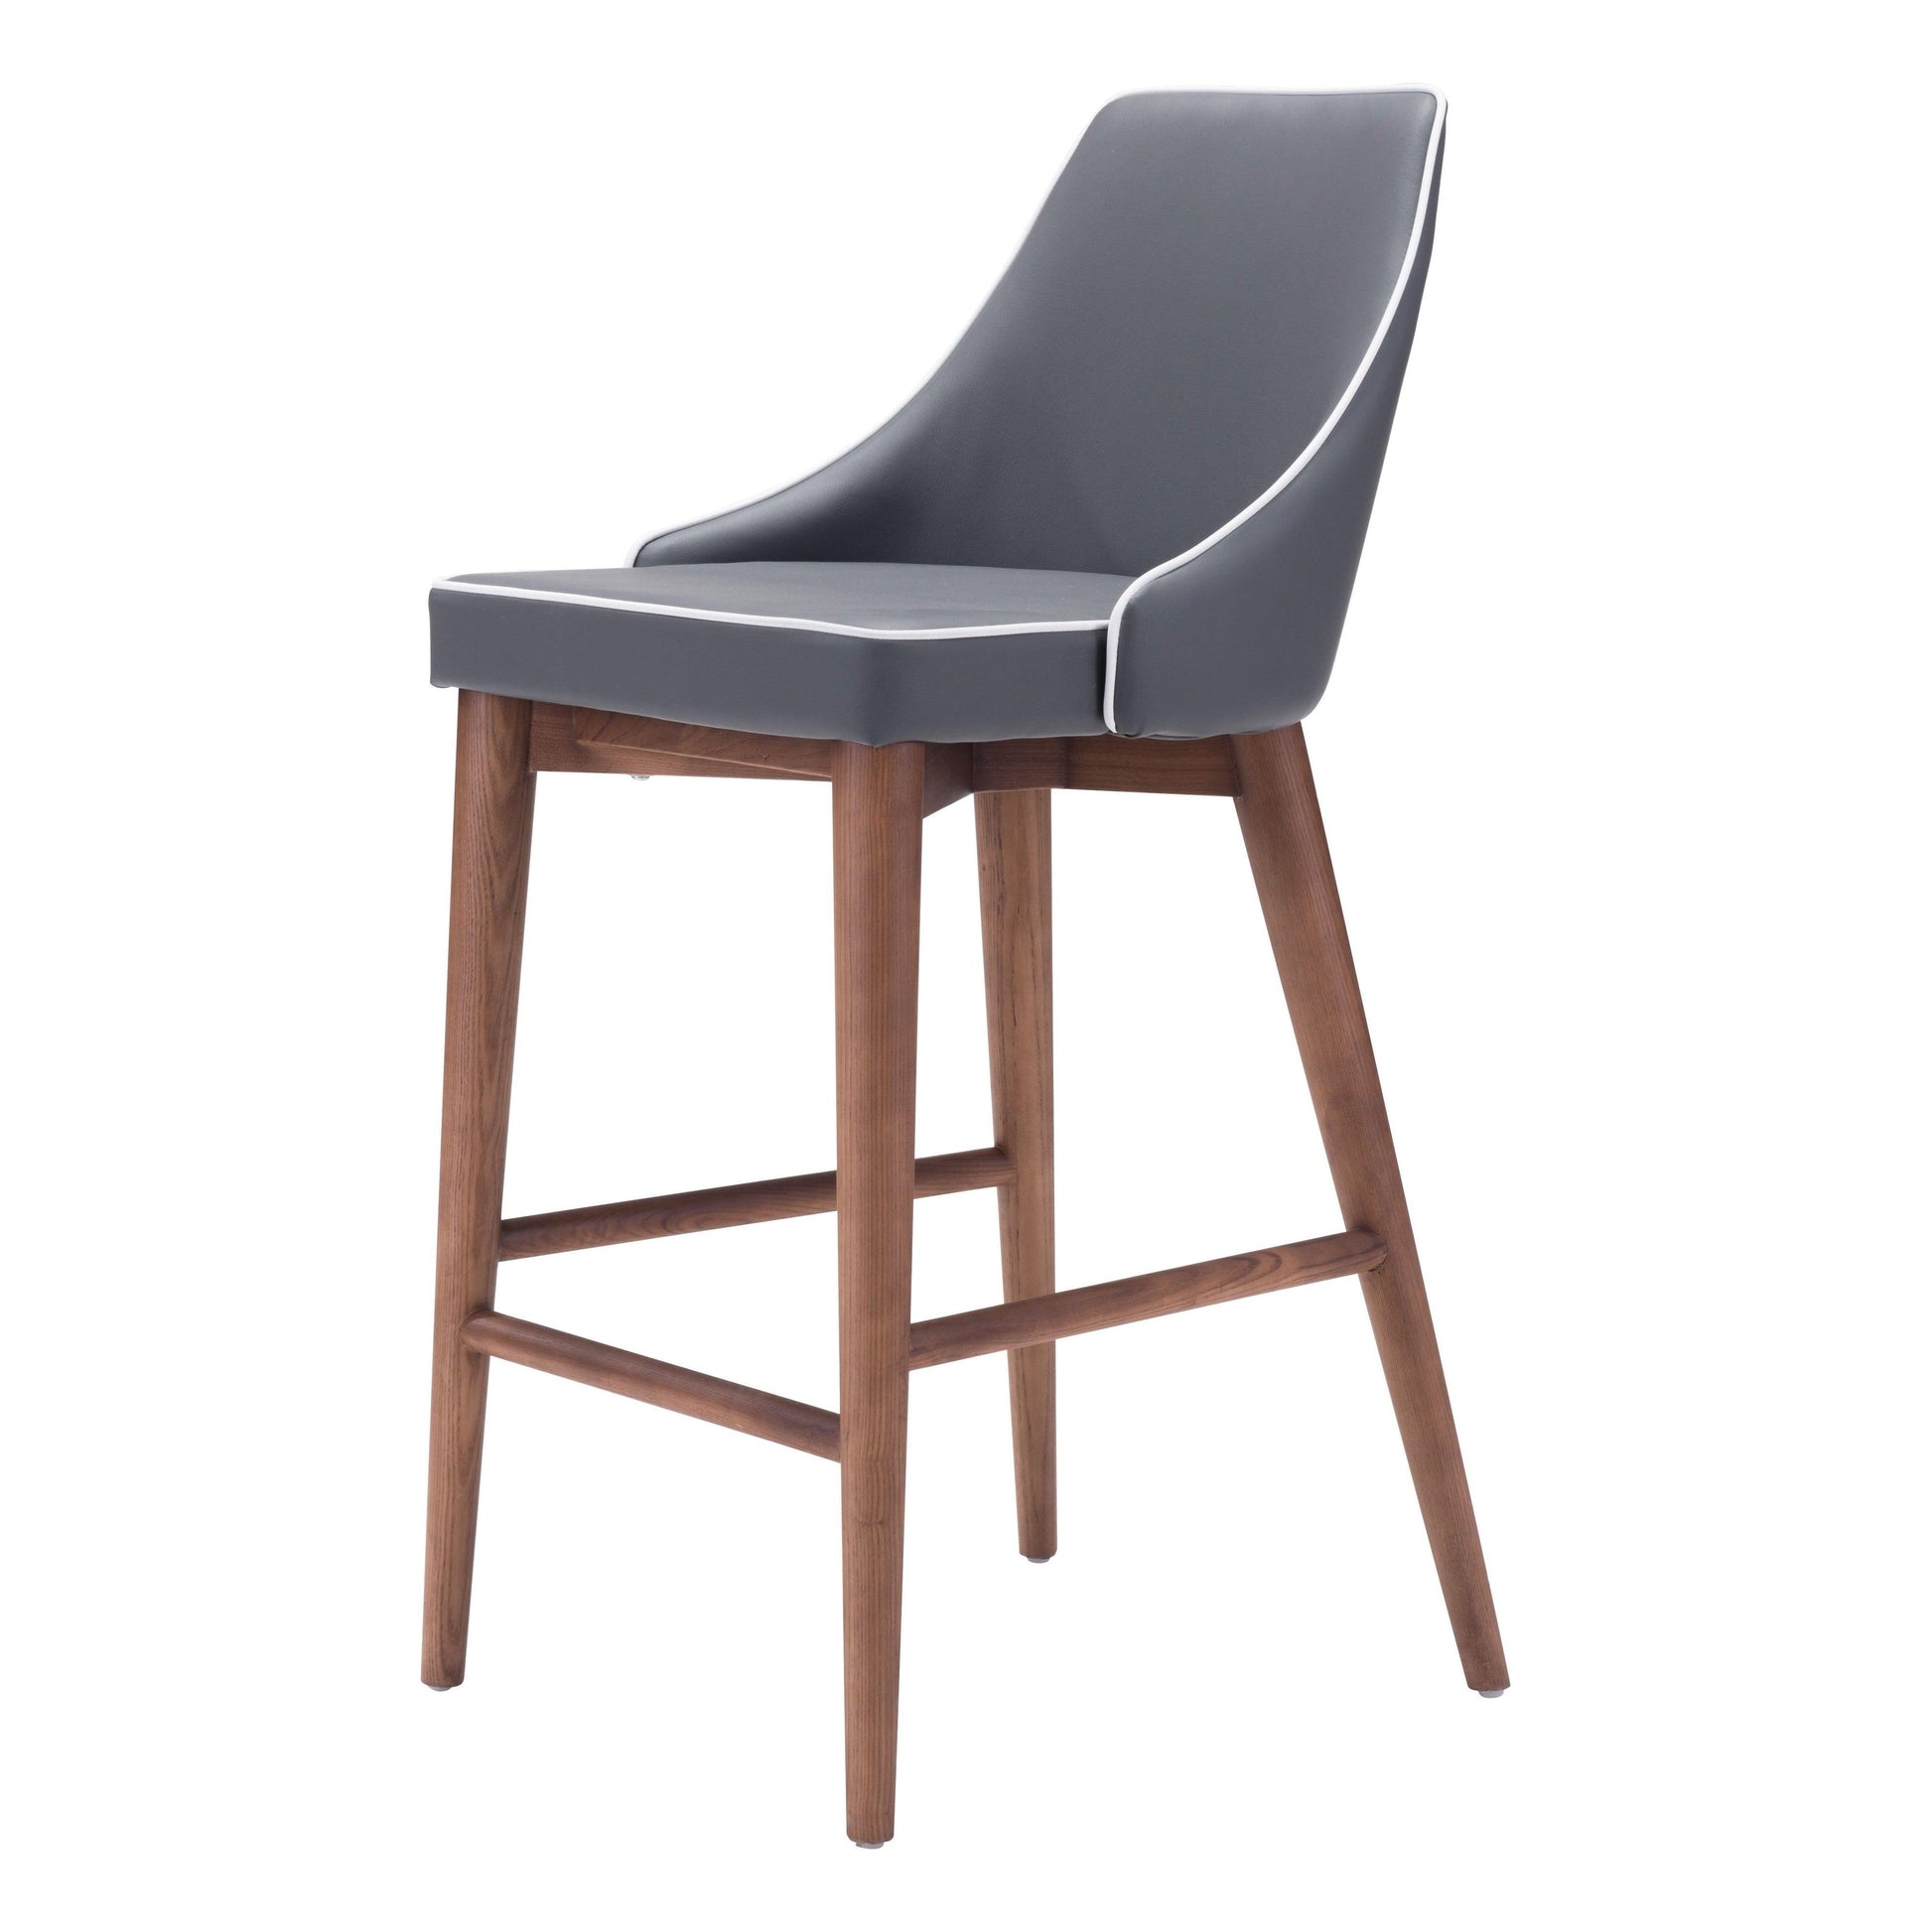 Moor Counter Chair Dark Gray - Sideboards and Things Back Type_With Back, Brand_Zuo Modern, Color_Brown, Color_Gray, Depth_10-20, Height_30-40, Materials_Upholstery, Materials_Wood, Product Type_Counter Height, Upholstery Type_Leather, Upholstery Type_Vegan Leather, Width_10-20, Wood Species_Birch, Wood Species_Plywood